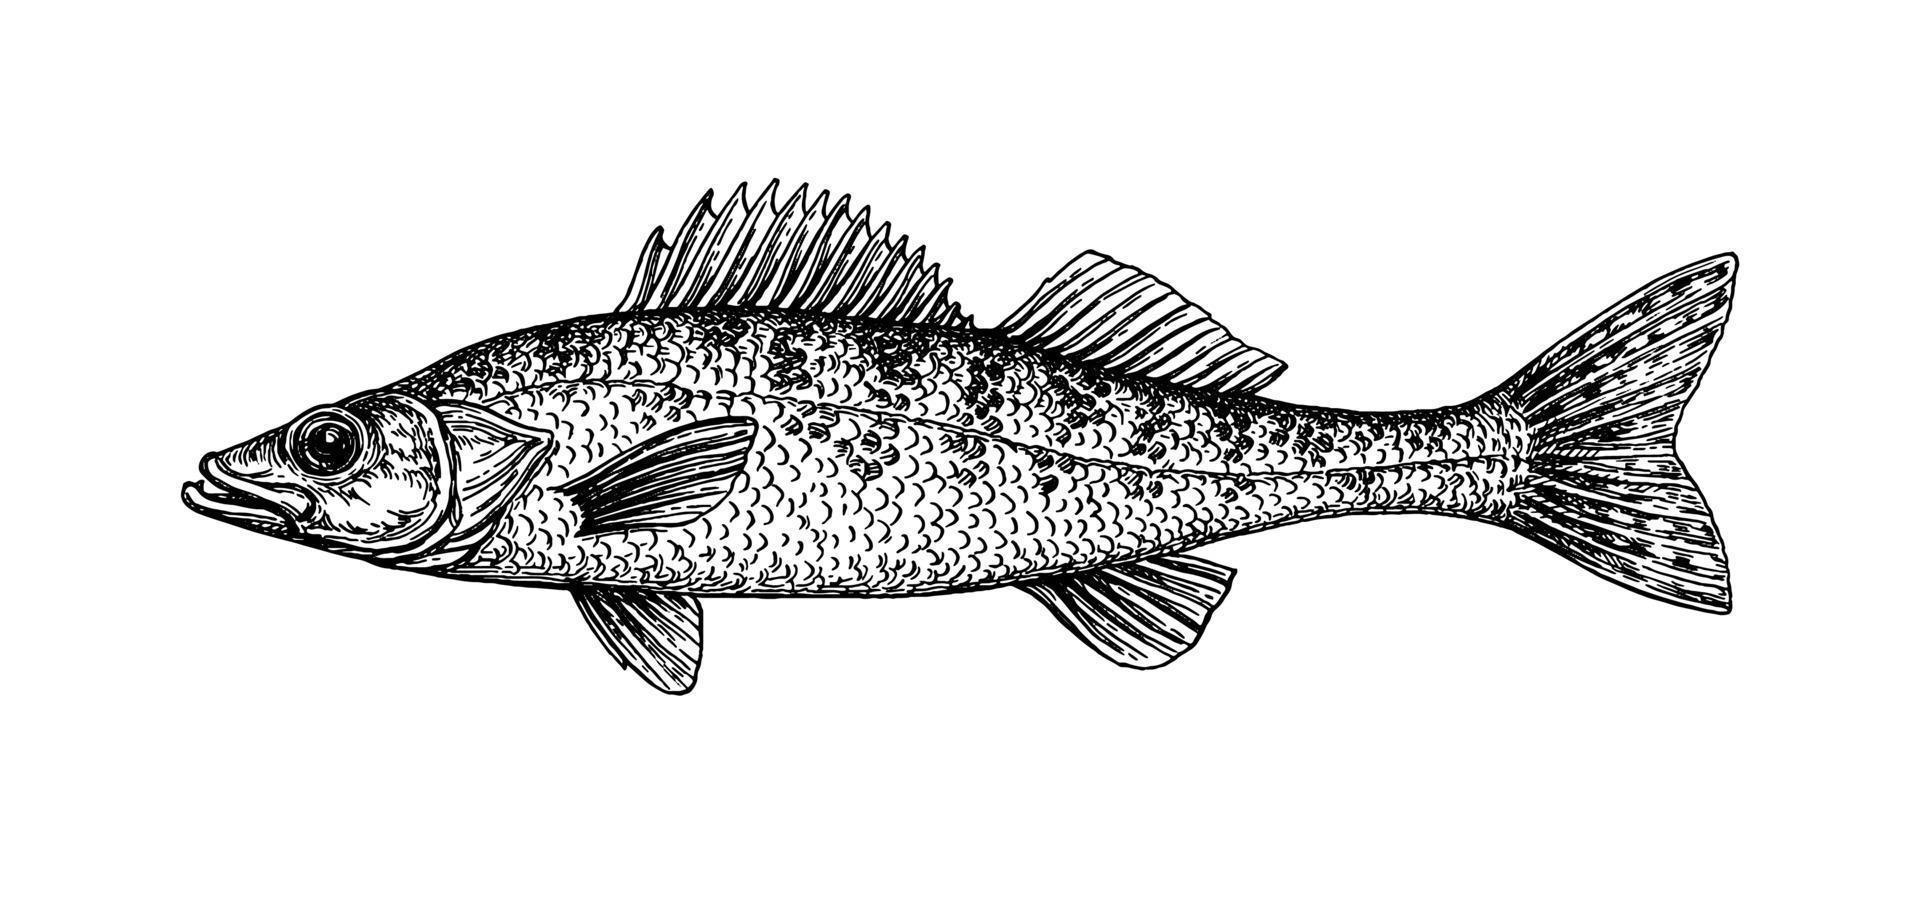 Walleye or yellow pike. Freshwater fish. Ink sketch isolated on white background. Hand drawn vector illustration. Retro style.